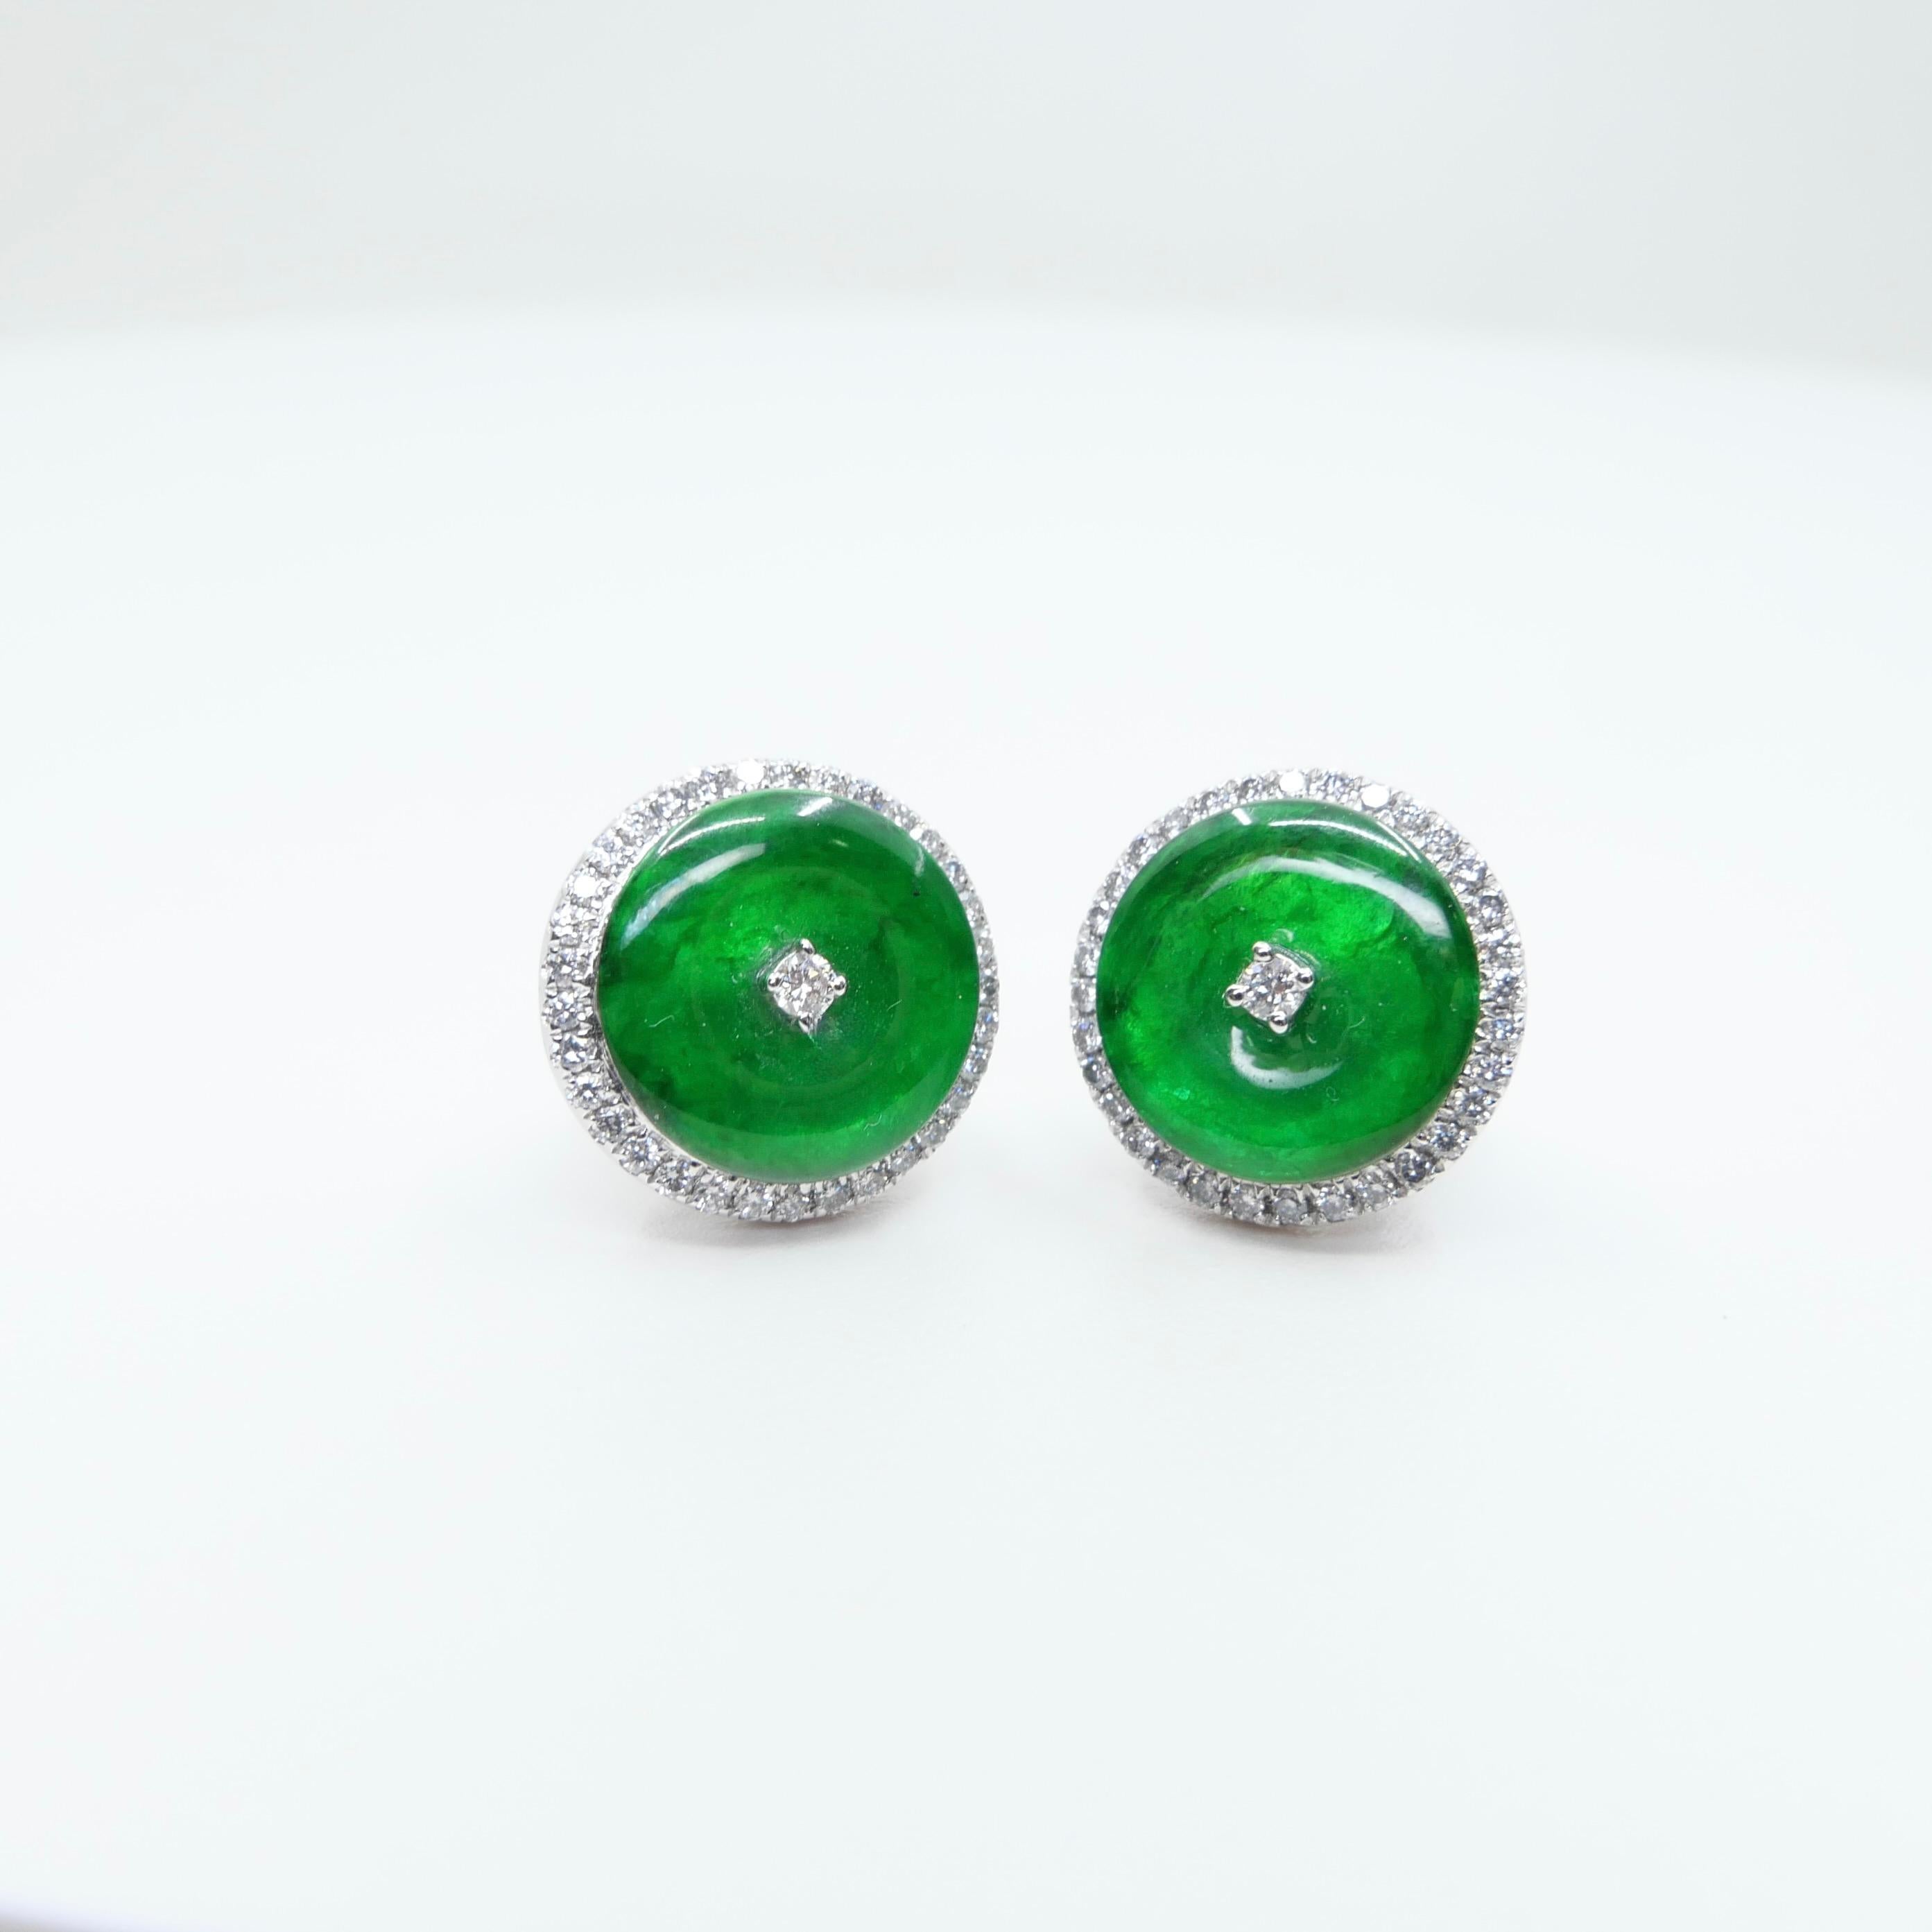 Certified Natural Type A Jadeite Jade And Diamond Earrings. Apple Green Color 4